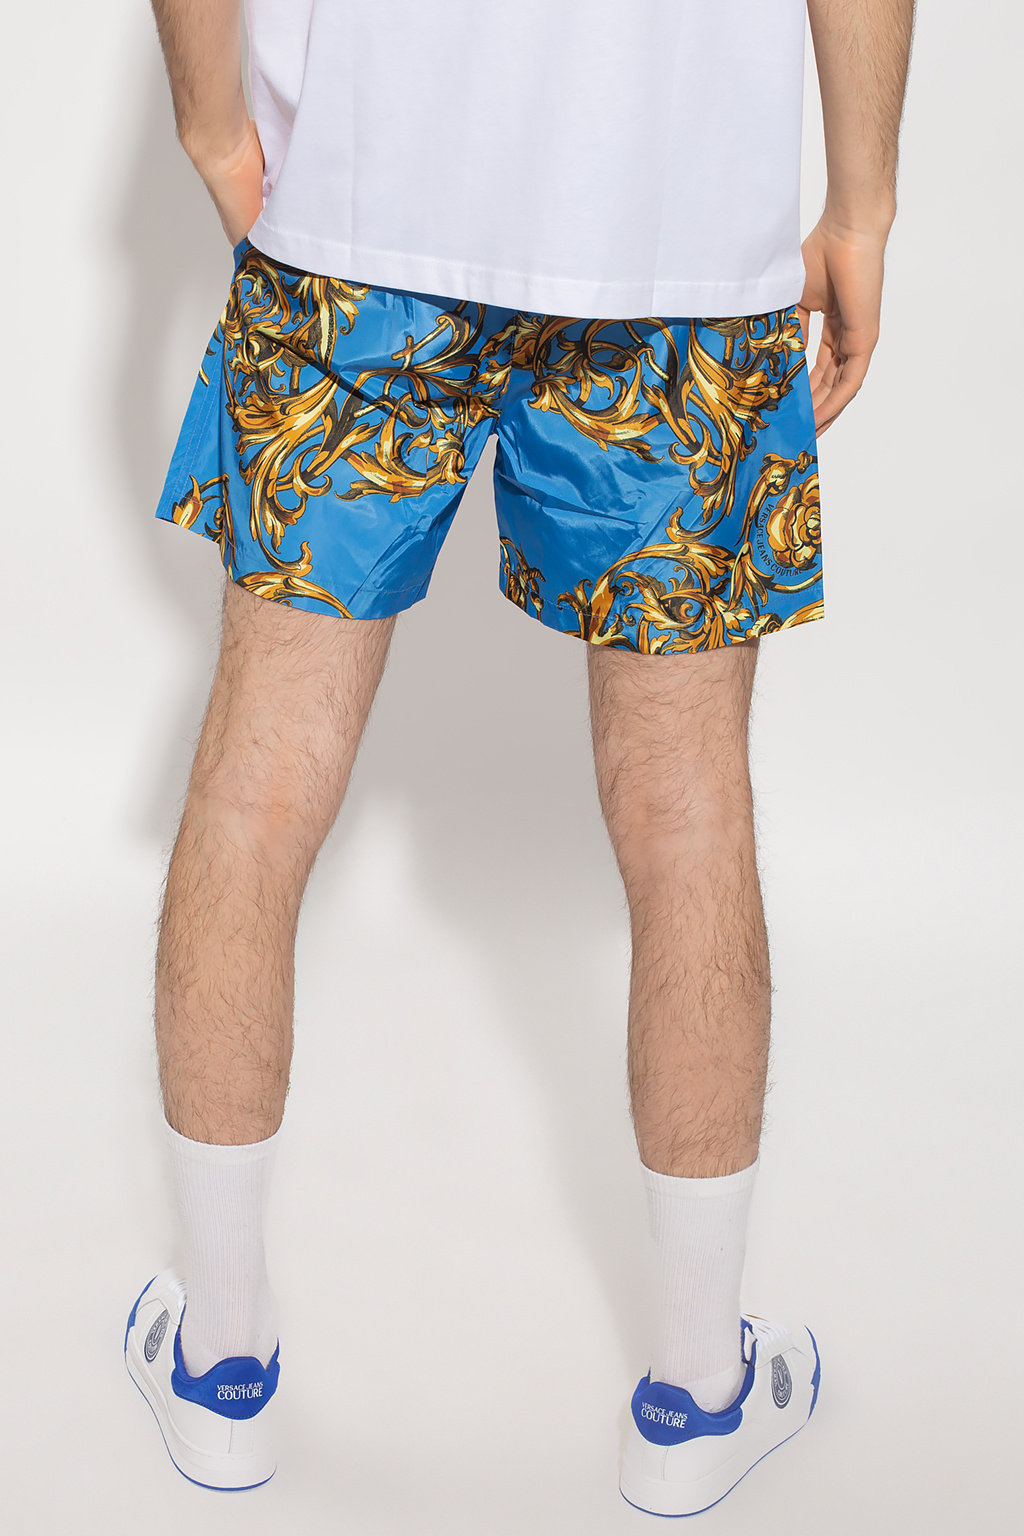 star rovic zip relaxed twill shorts d085665126724 sge Shorts with Regalia Baroque motif